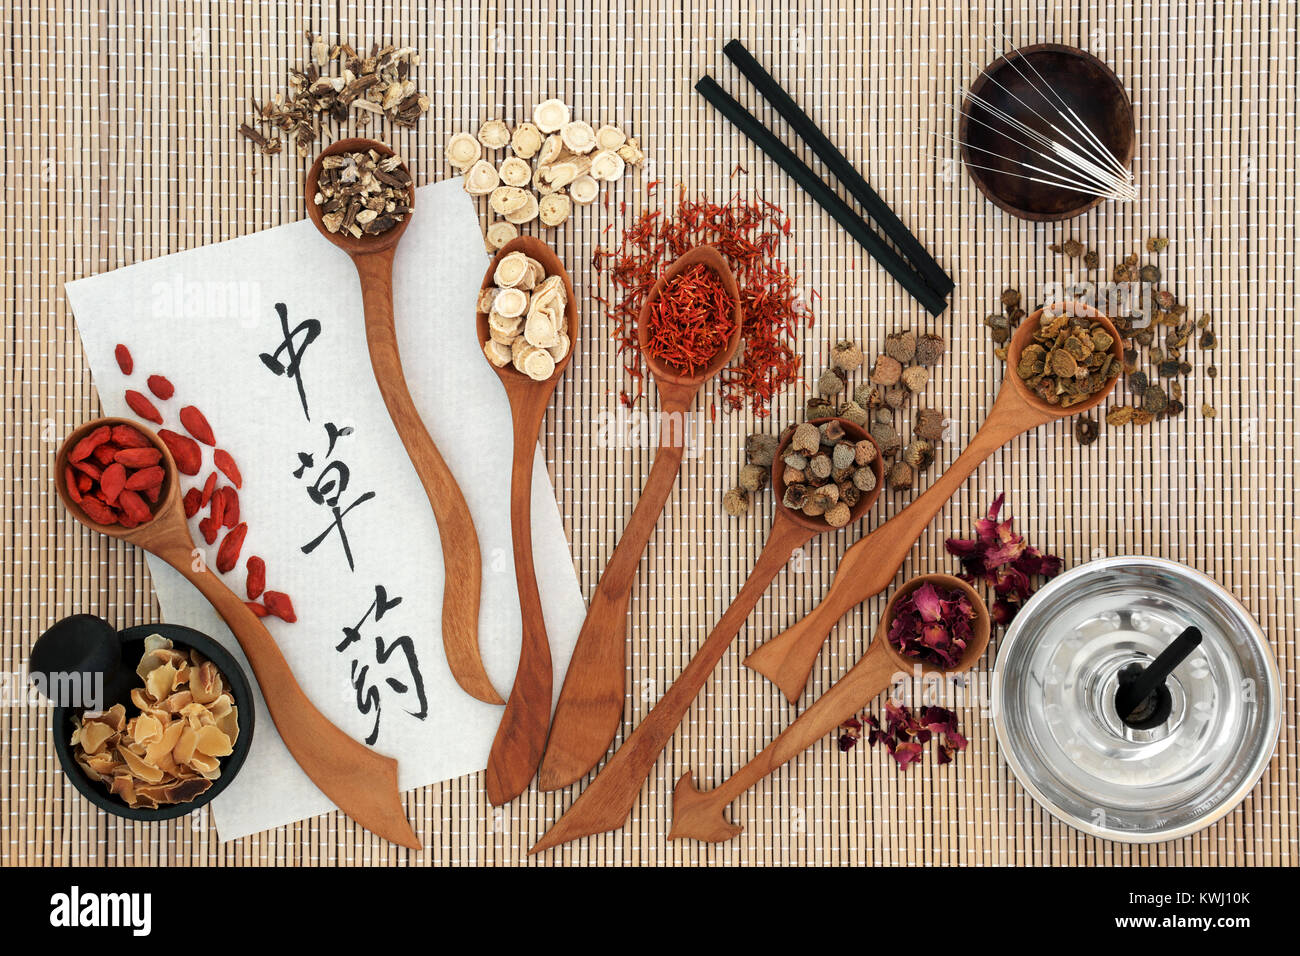 Chinese acupuncture needles and moxa sticks used in moxibustion therapy with herbs and calligraphy script on rice paper. Stock Photo